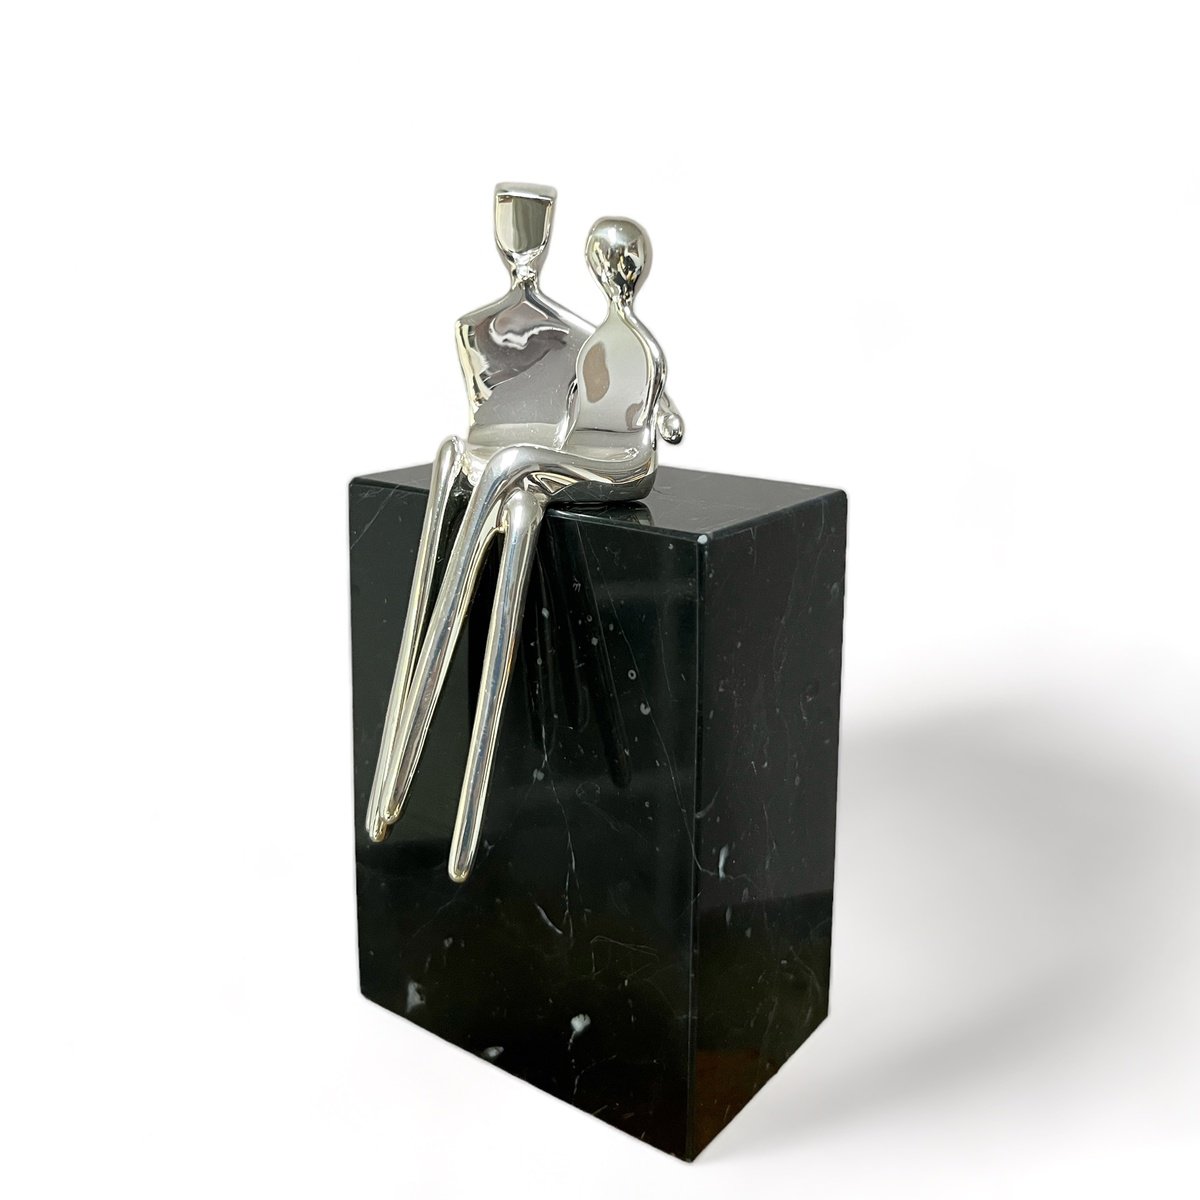 Caress a small silver plated sculpture of a loving couple by Yenny Cocq